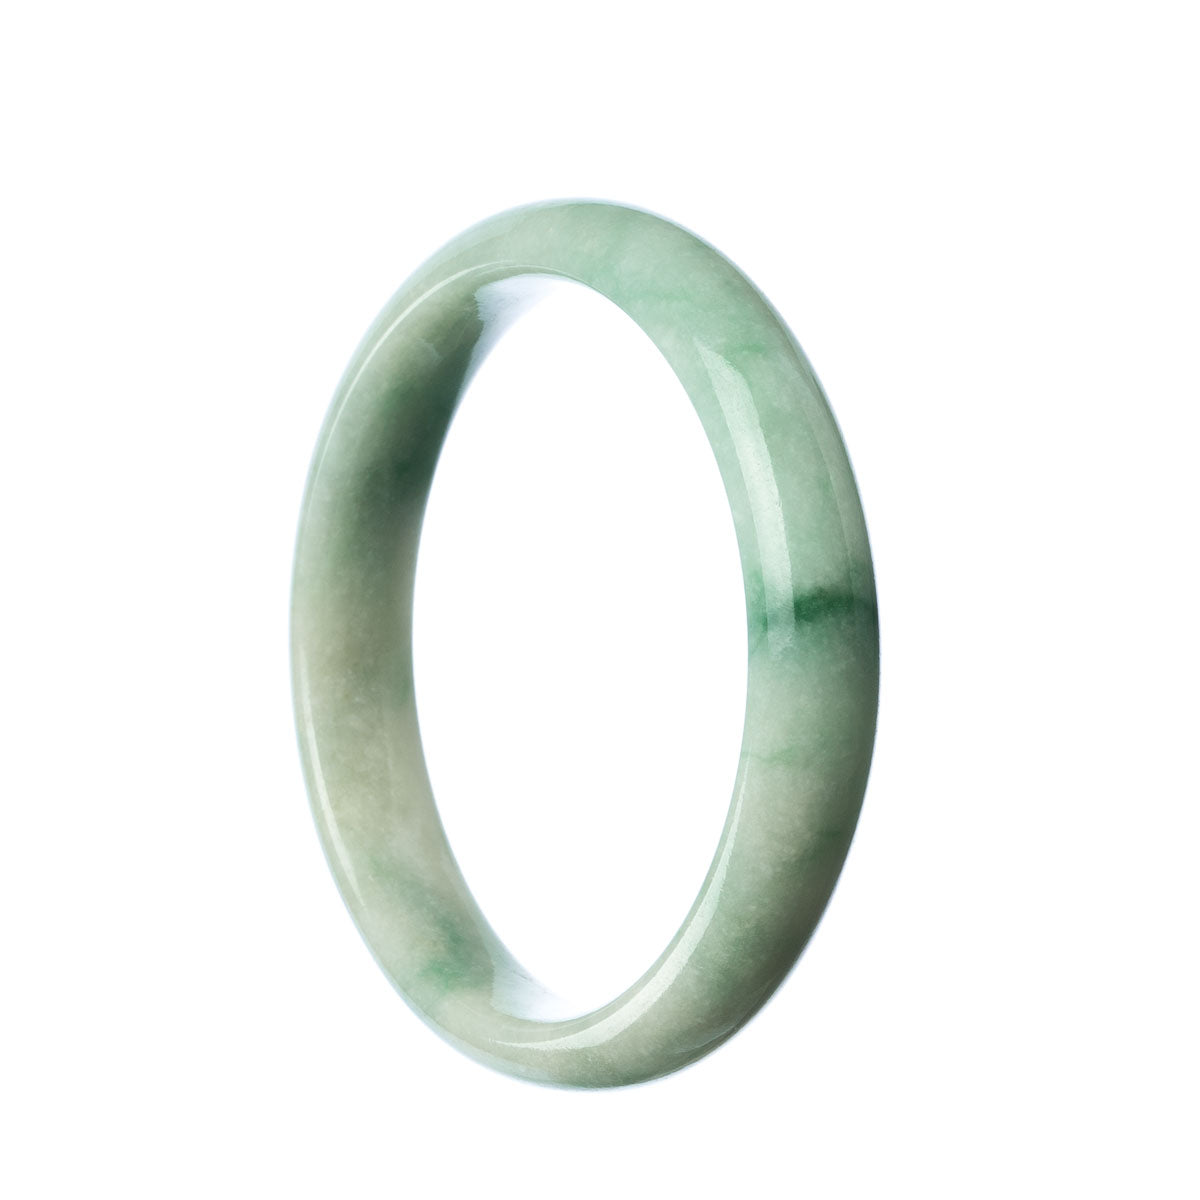 A close-up photo of a half-moon shaped jade bangle in a pale green color. The bangle is made of genuine Grade A Burmese jade and measures 57mm in diameter. It is a beautiful piece of jewelry from MAYS GEMS.